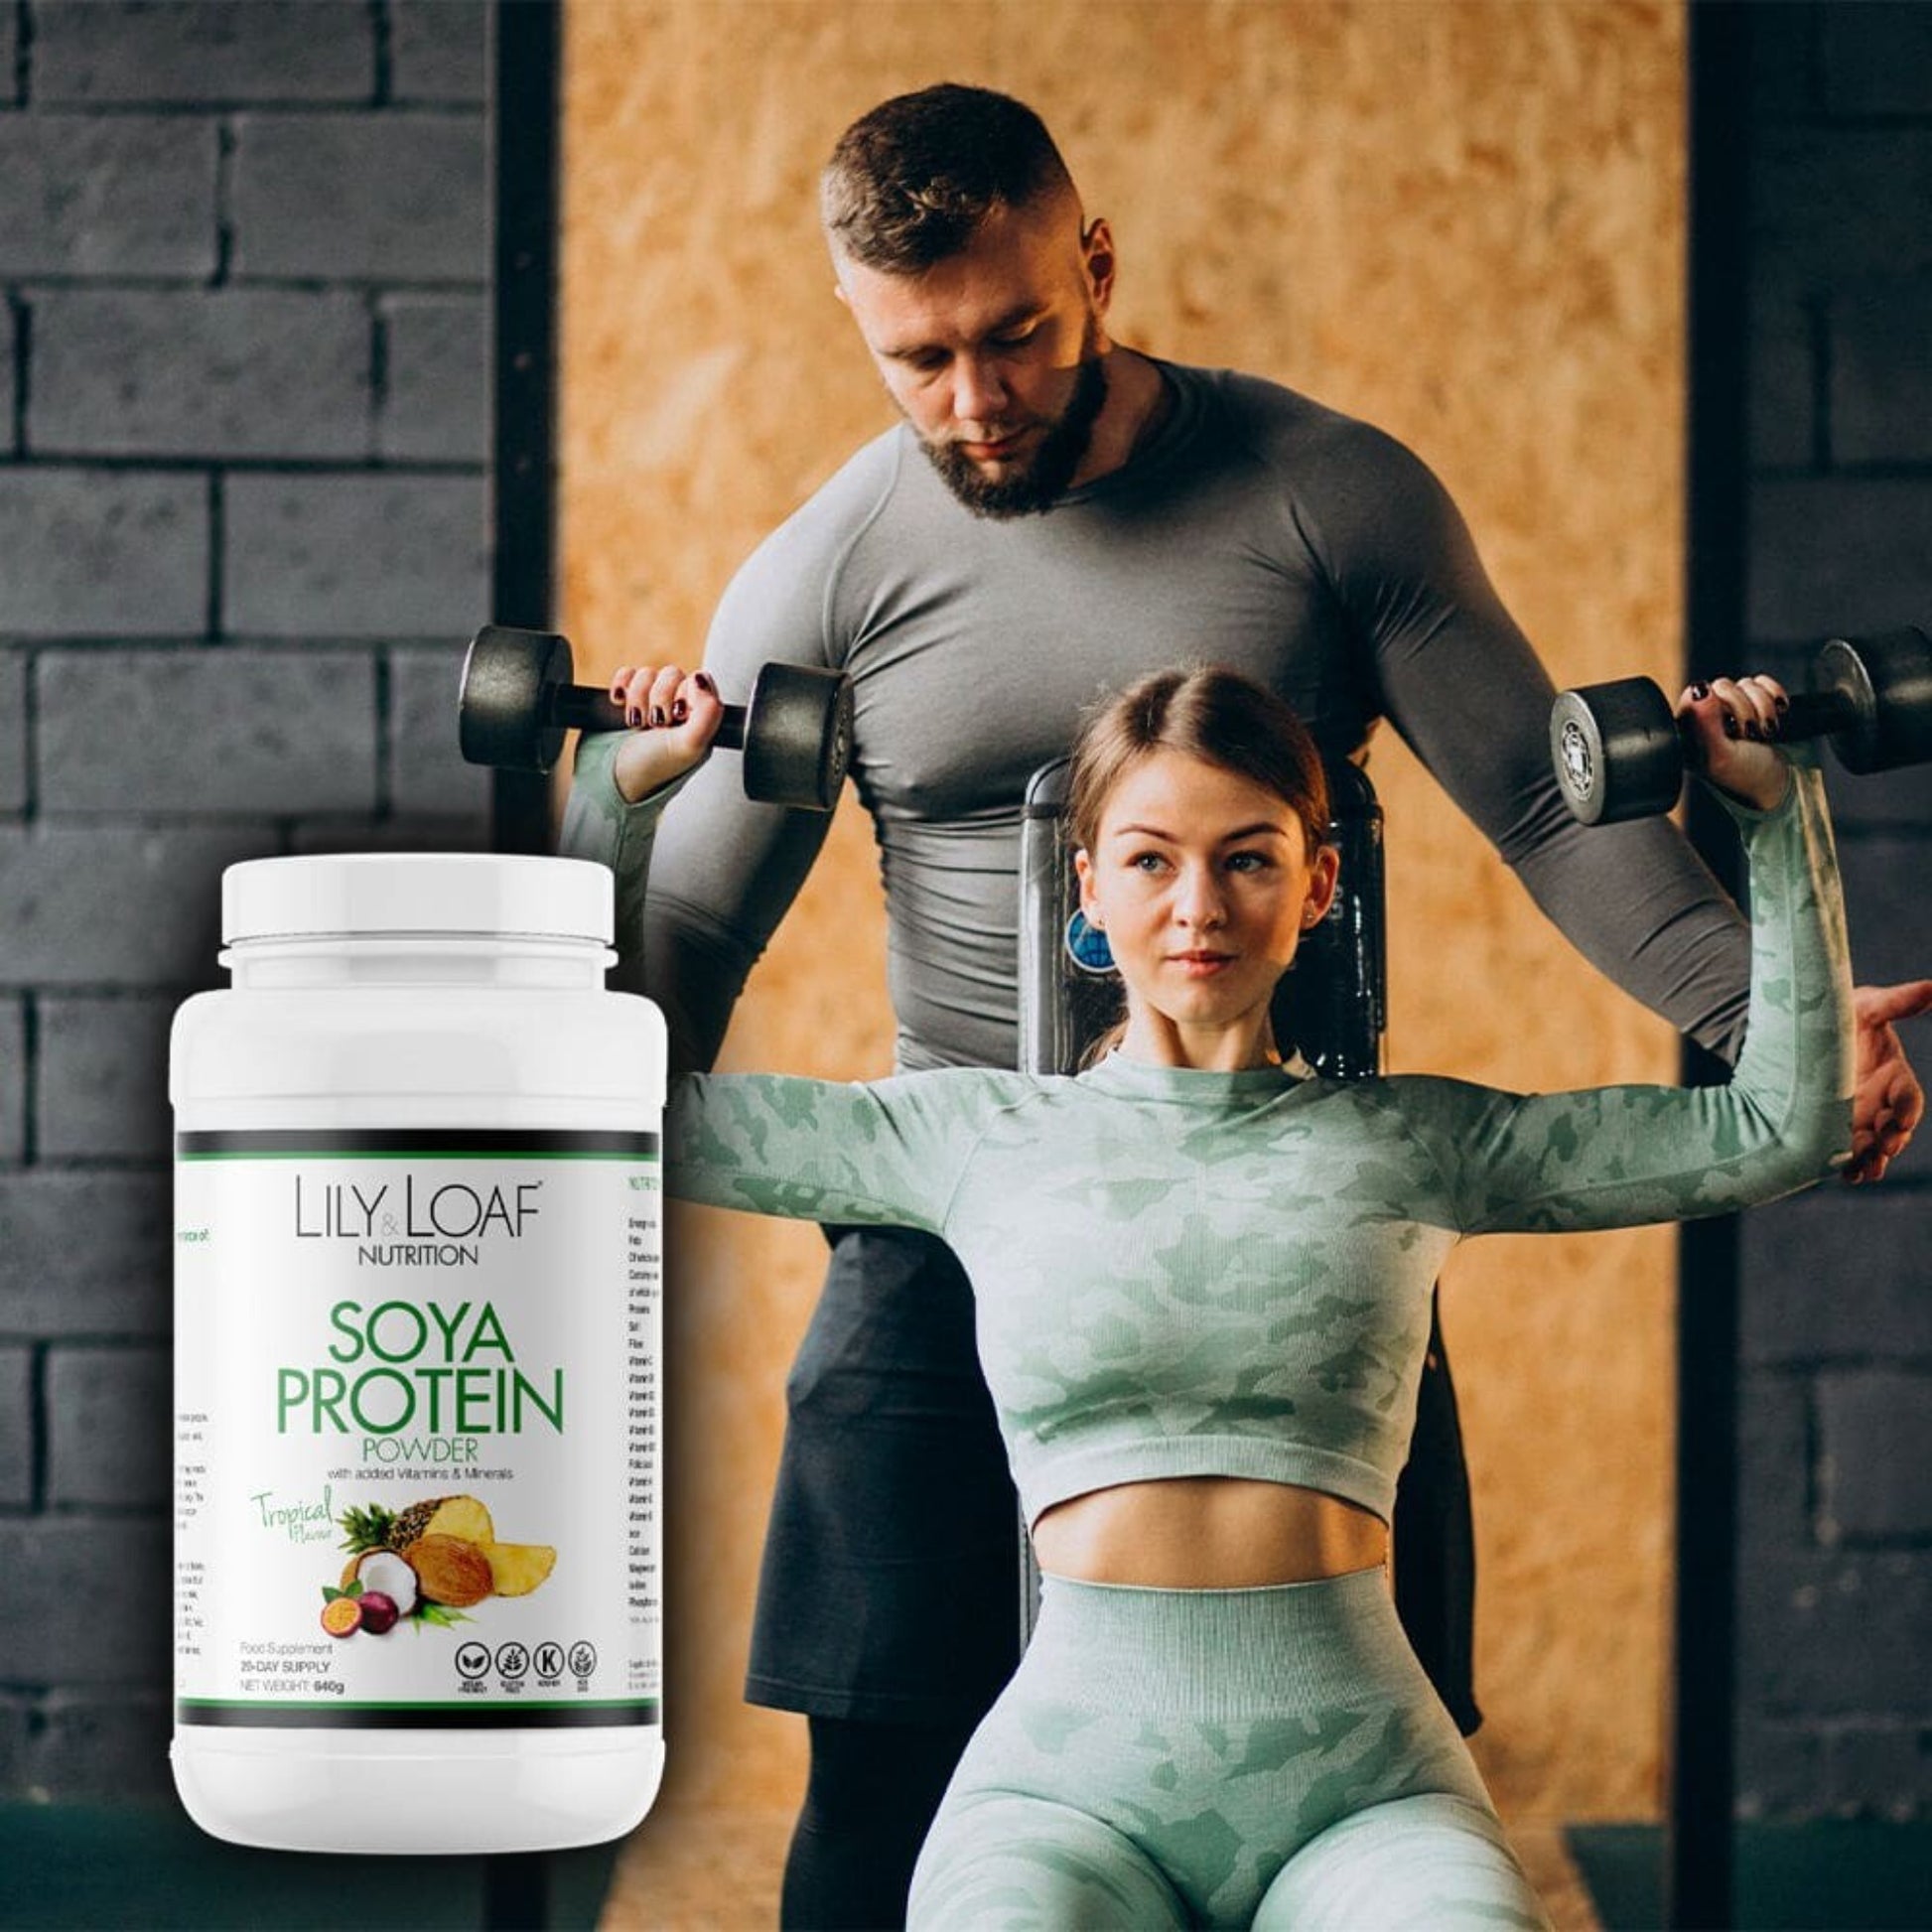 Showcasing a woman engaged in an intense workout with dumbells, paired with a container of Lily & Loaf Soya Protein Powder, suggesting the product's role in supporting an active and healthy lifestyle.